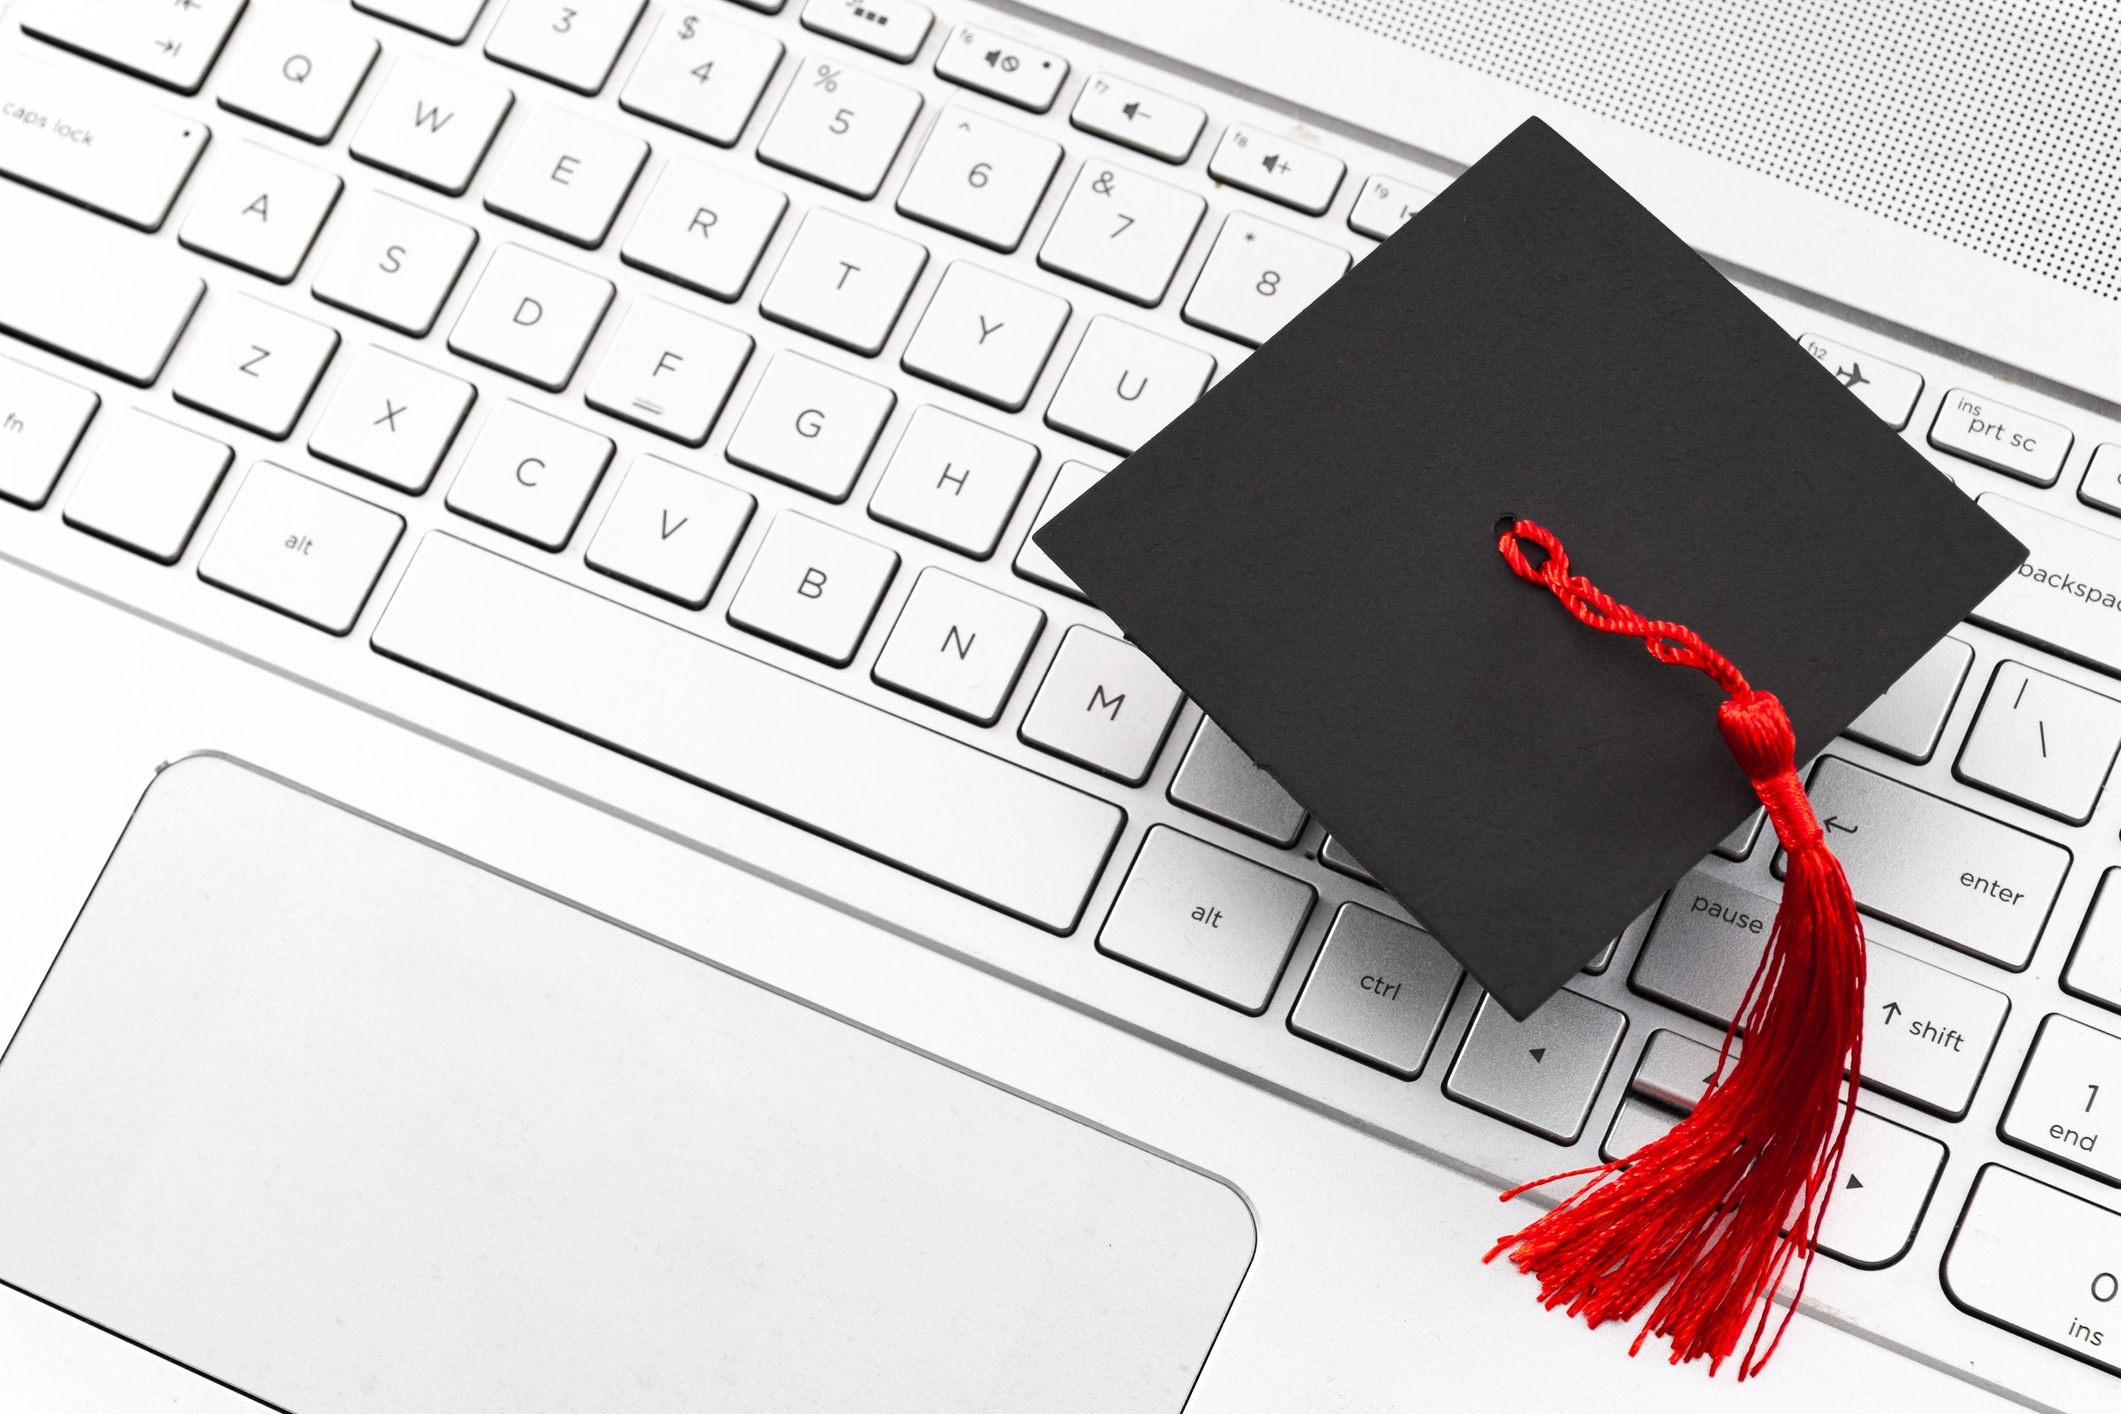 7 Questions to Consider Before Beginning an Online PhD, Master's, or Certificate Program